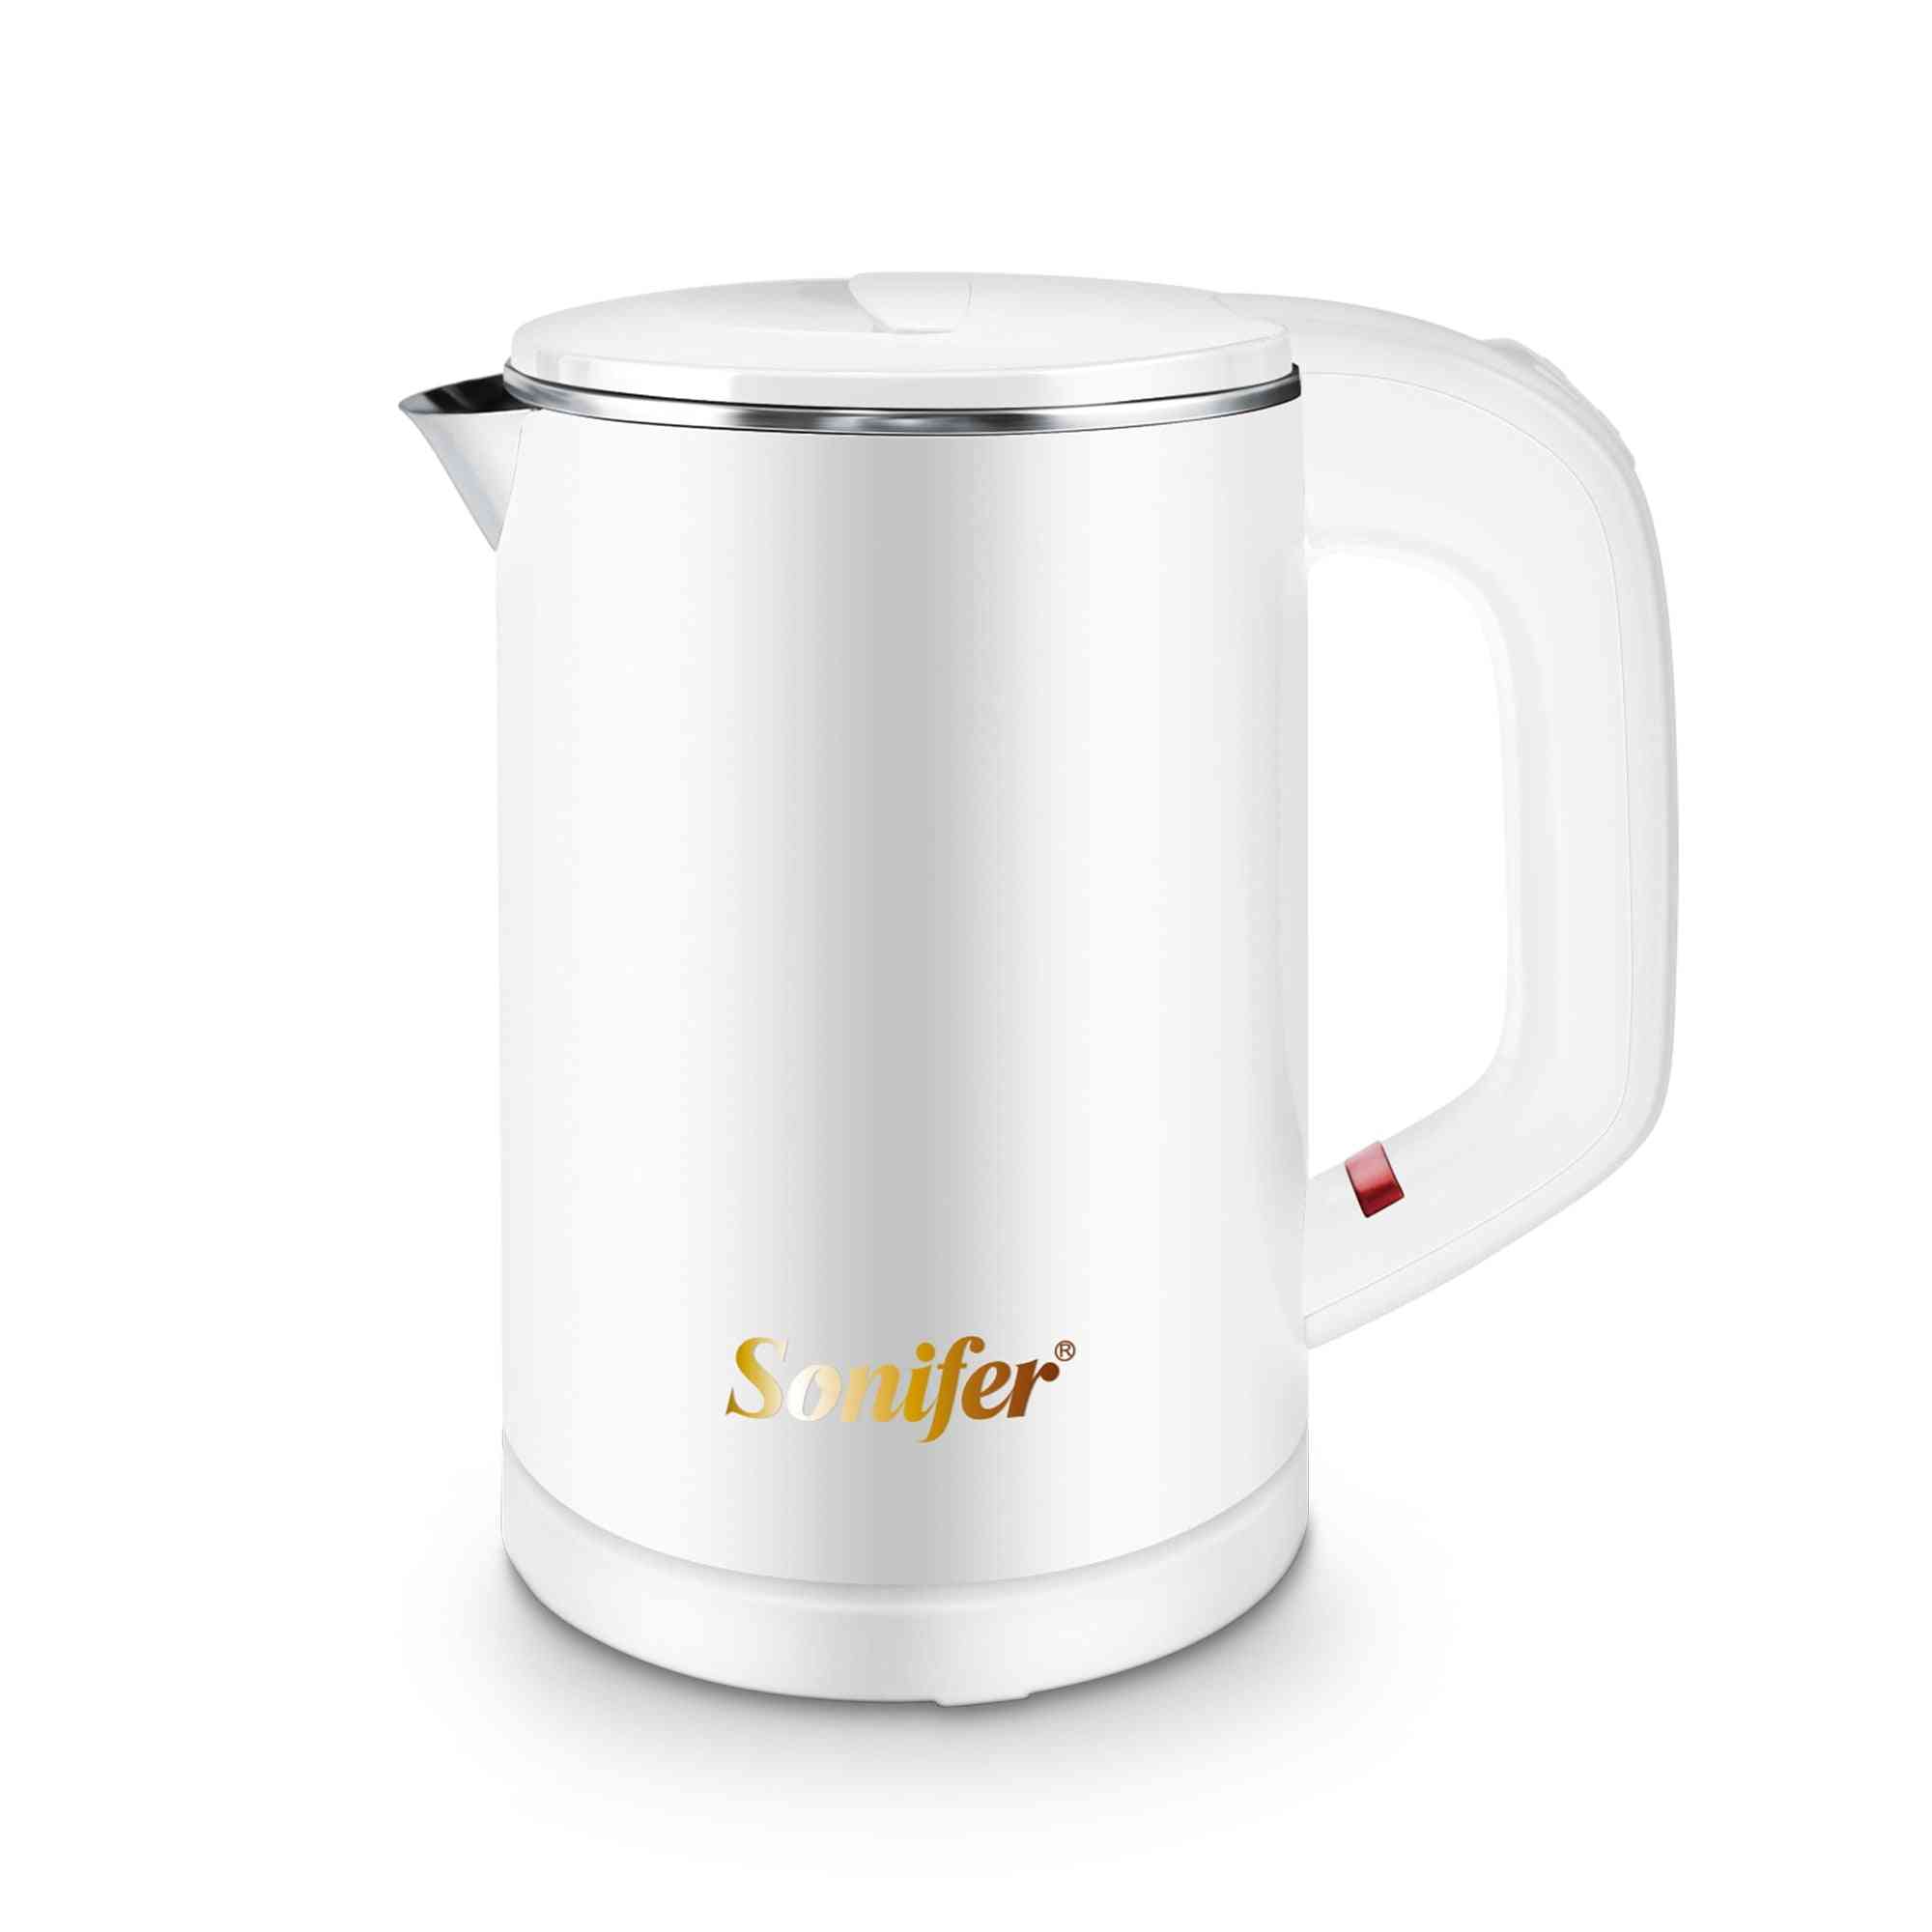 Mini Electric Kettle, Stainless Steel, Quietly Cordless - Heating Teapot